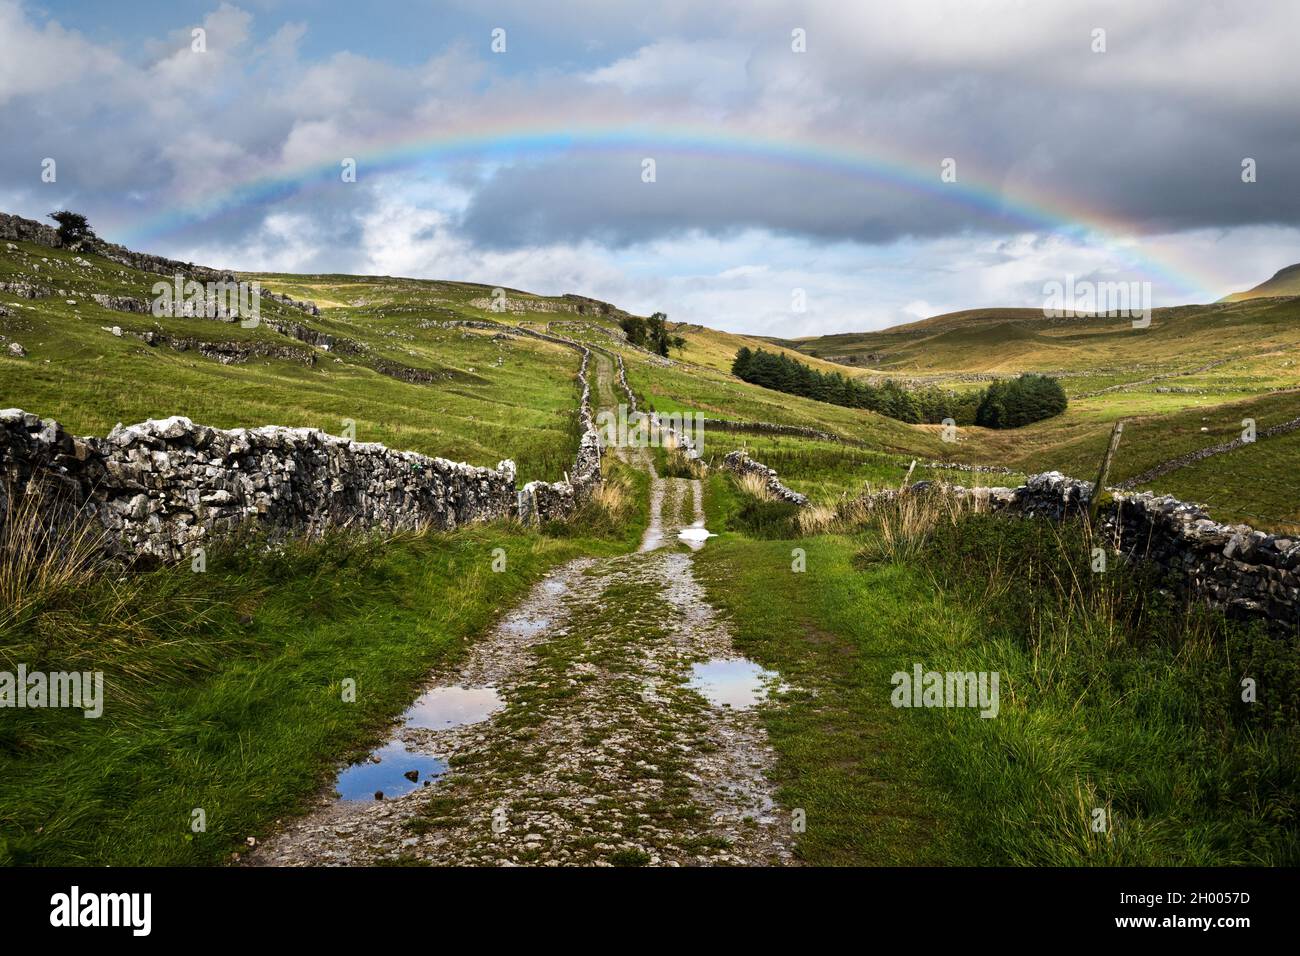 Rainbow over The Pennine Way, Horton-in-Ribblesdale, Yorkshire Dales National Park, UK Stock Photo